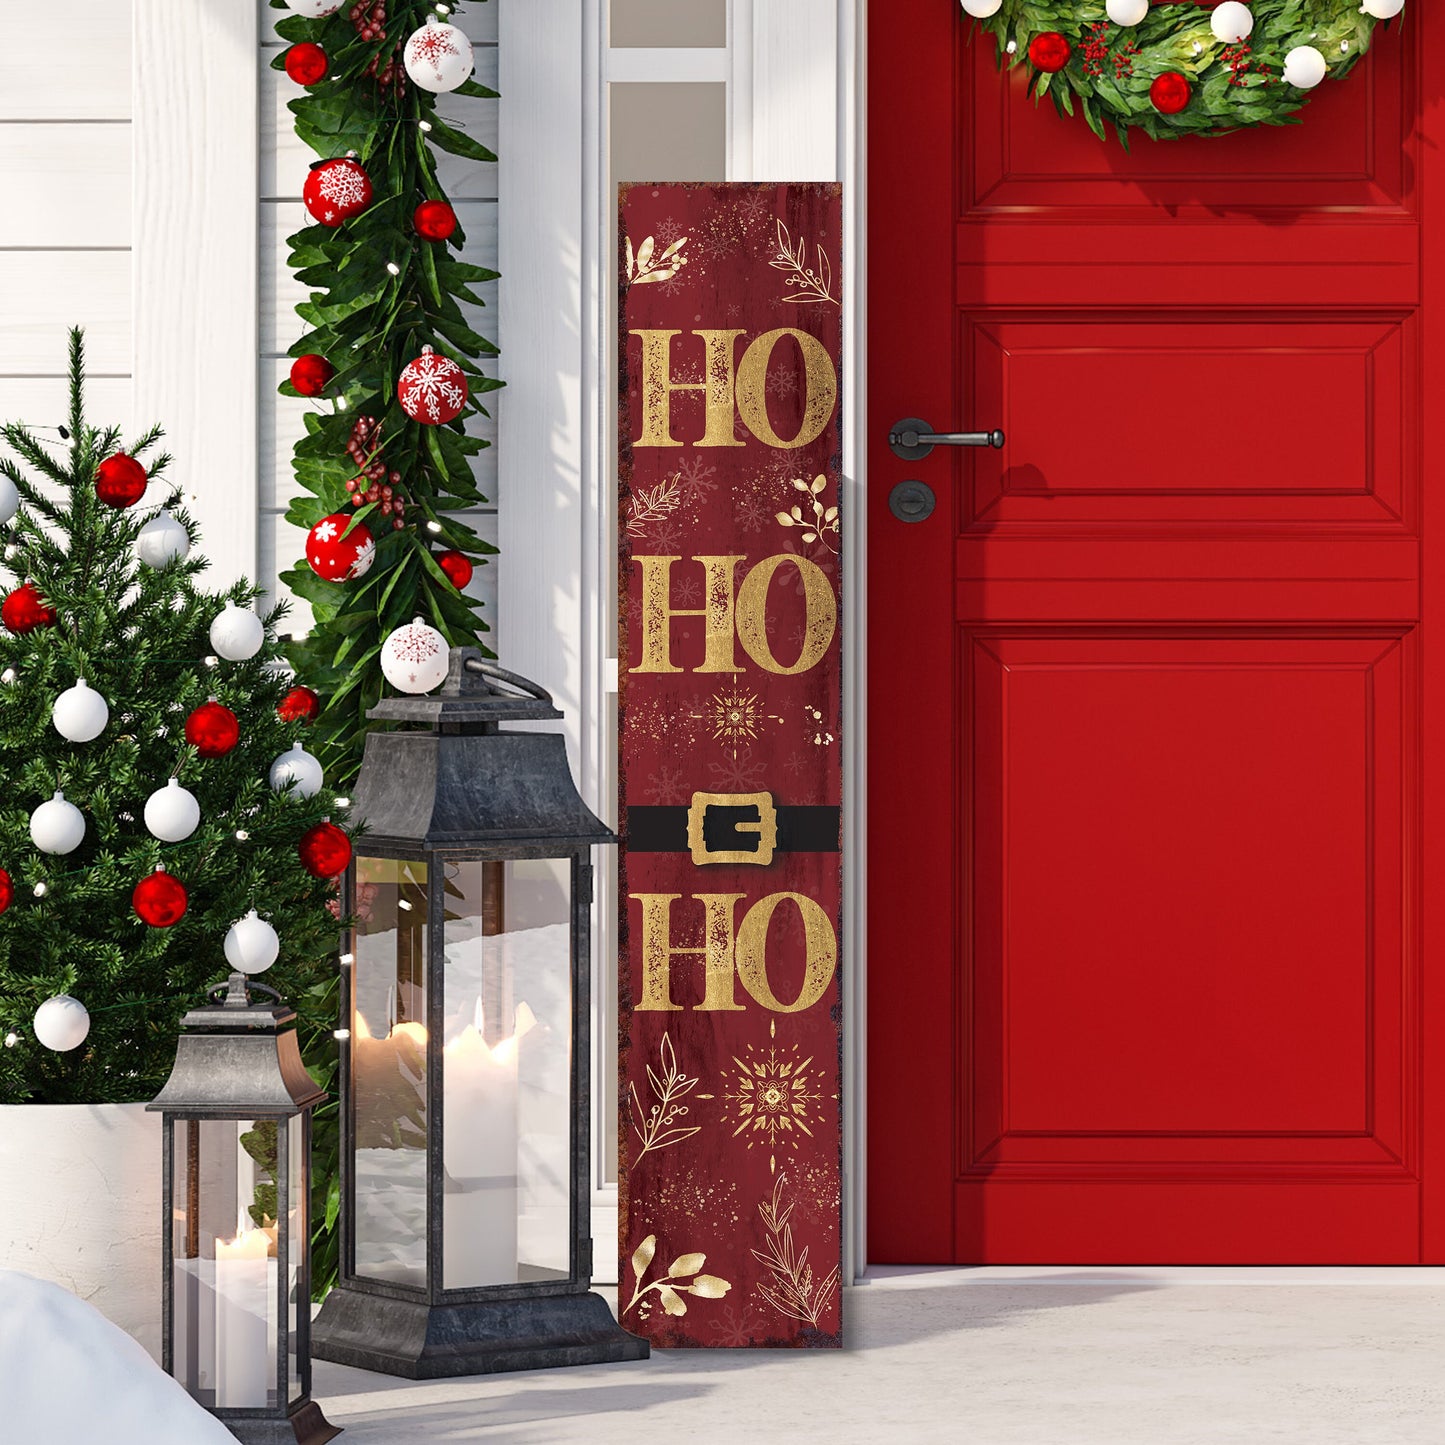 48in "Ho Ho Ho" Christmas Porch Sign - Front Porch Christmas Decor Welcome Sign, Rustic Modern Farmhouse Entryway Board